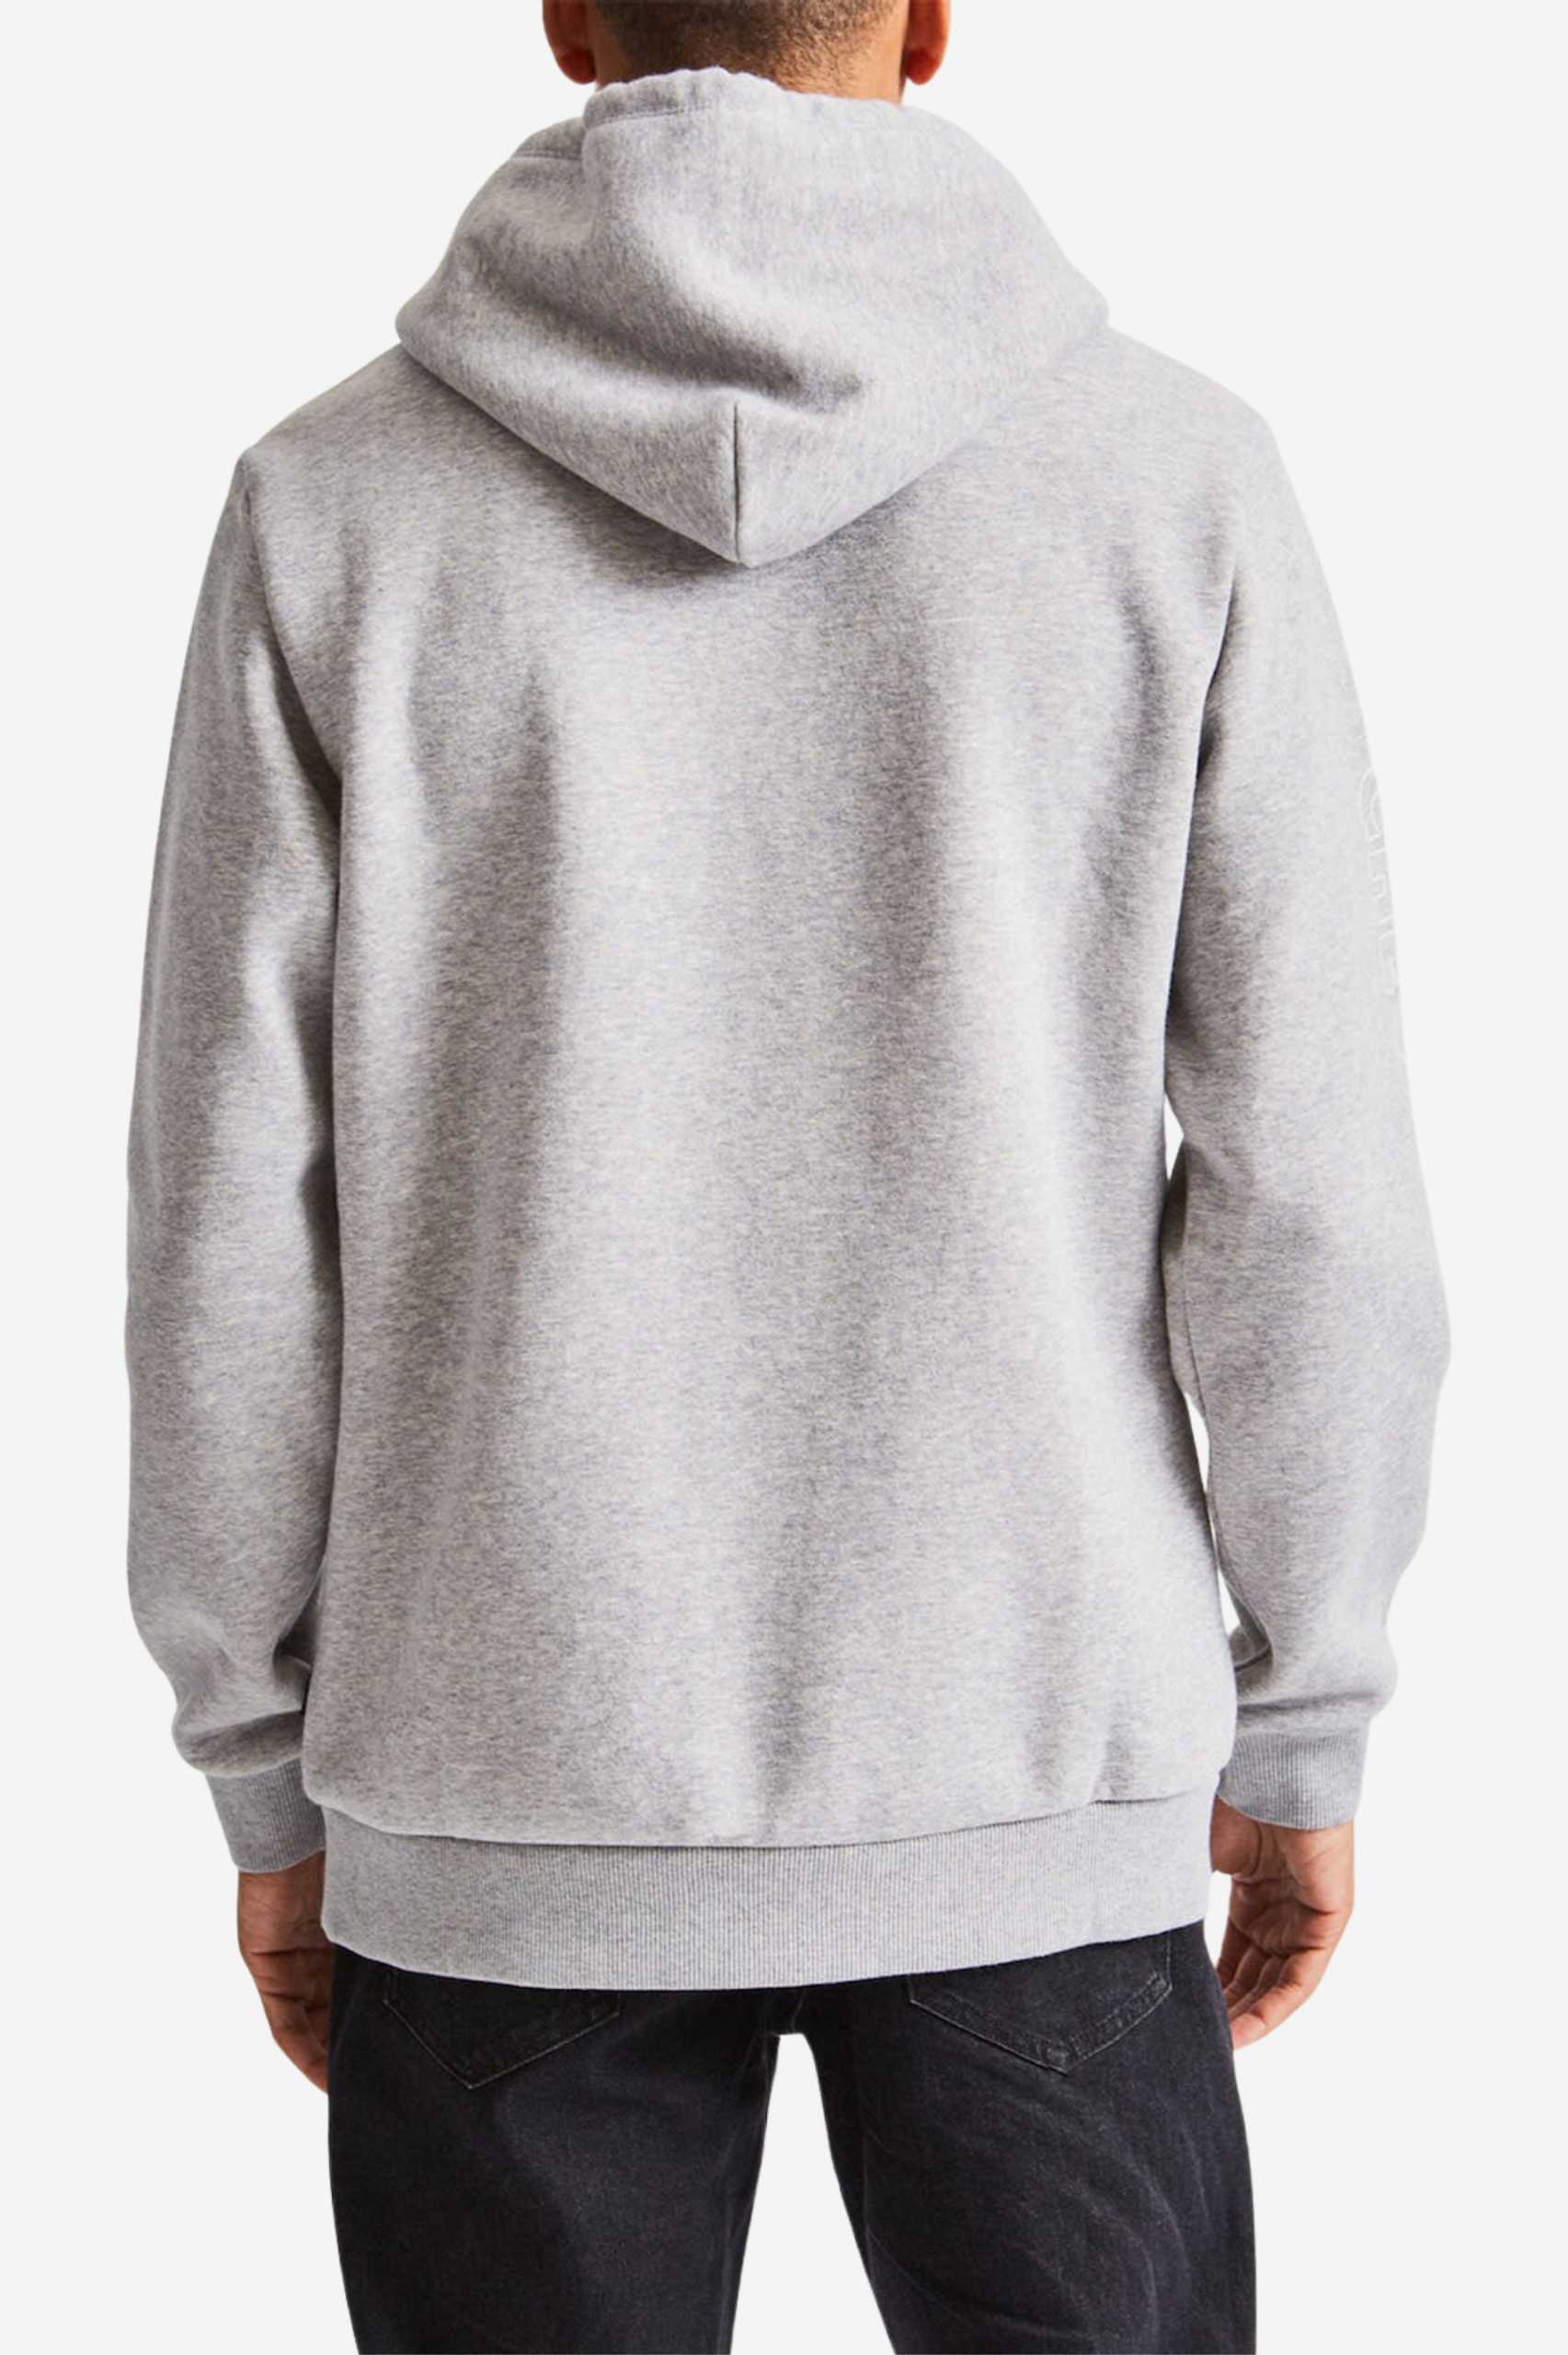 Brixton Mens Heartbeat Hood in Chevelle Grey